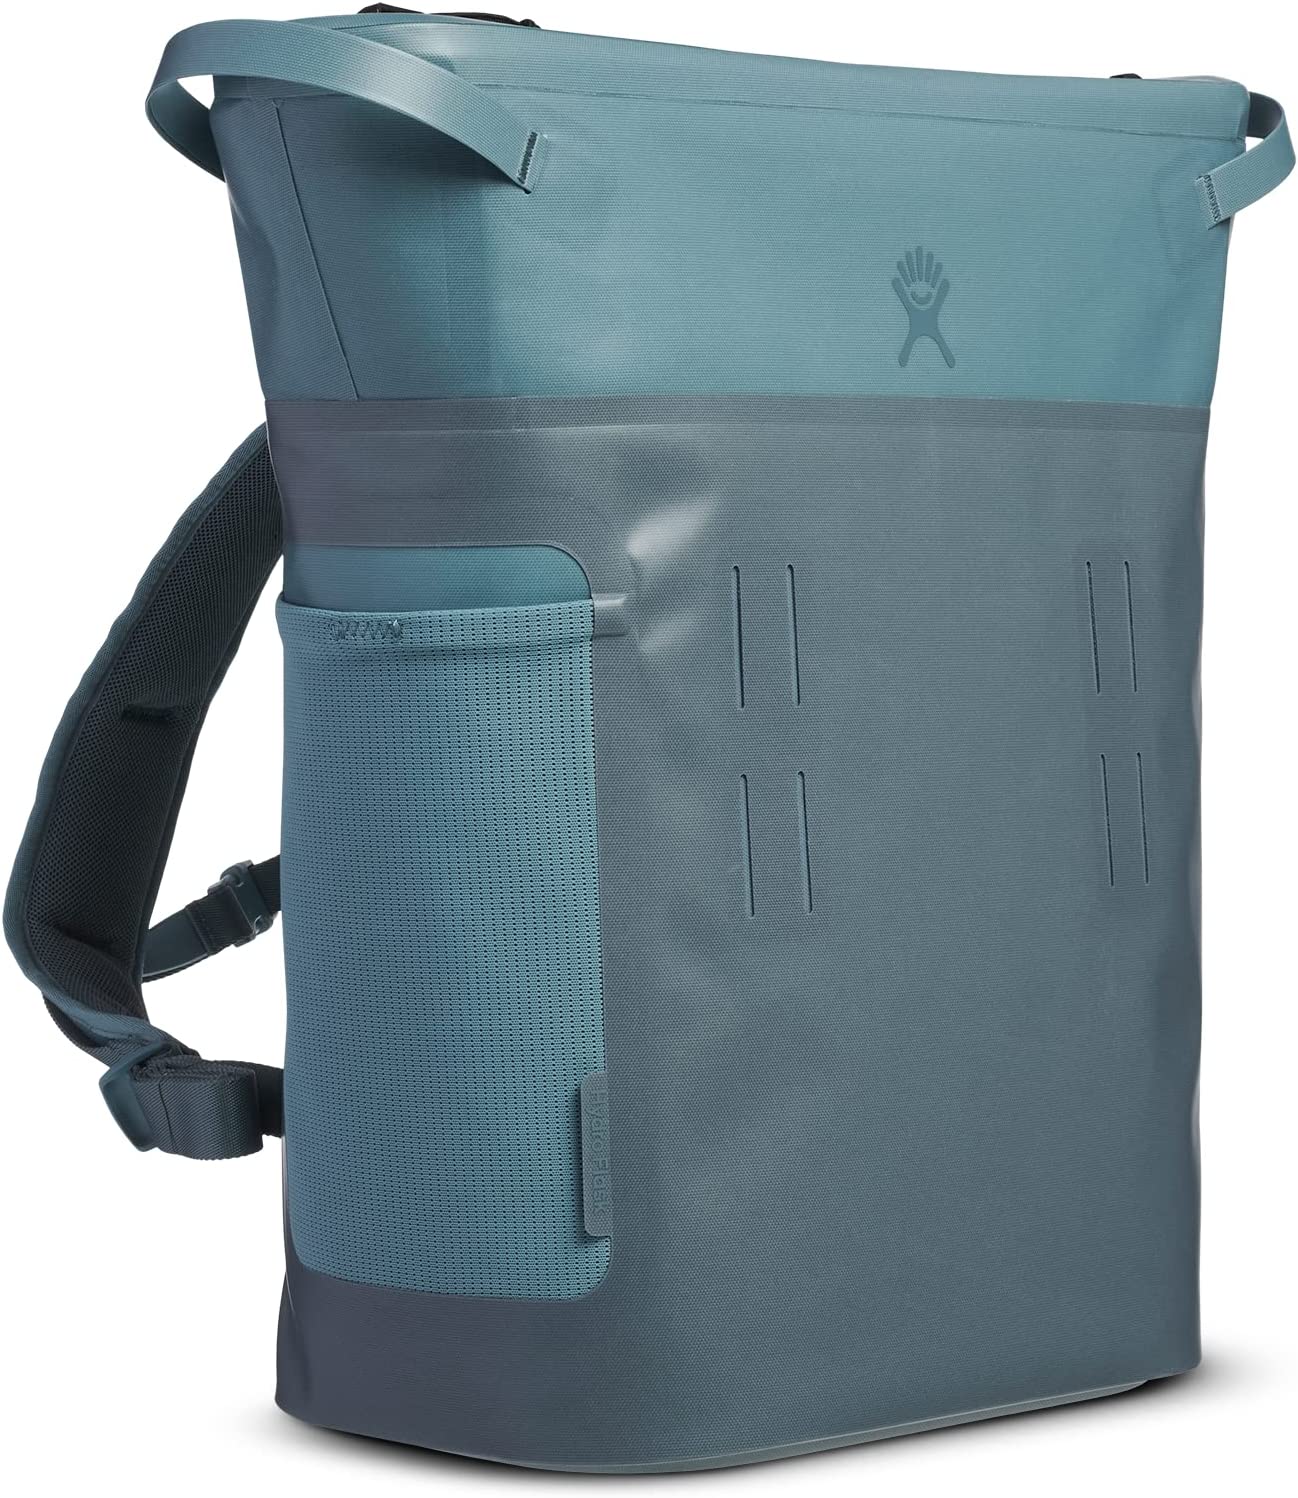 Camping gear (Hydro Flask 20 L Day Escape backpack cooler)